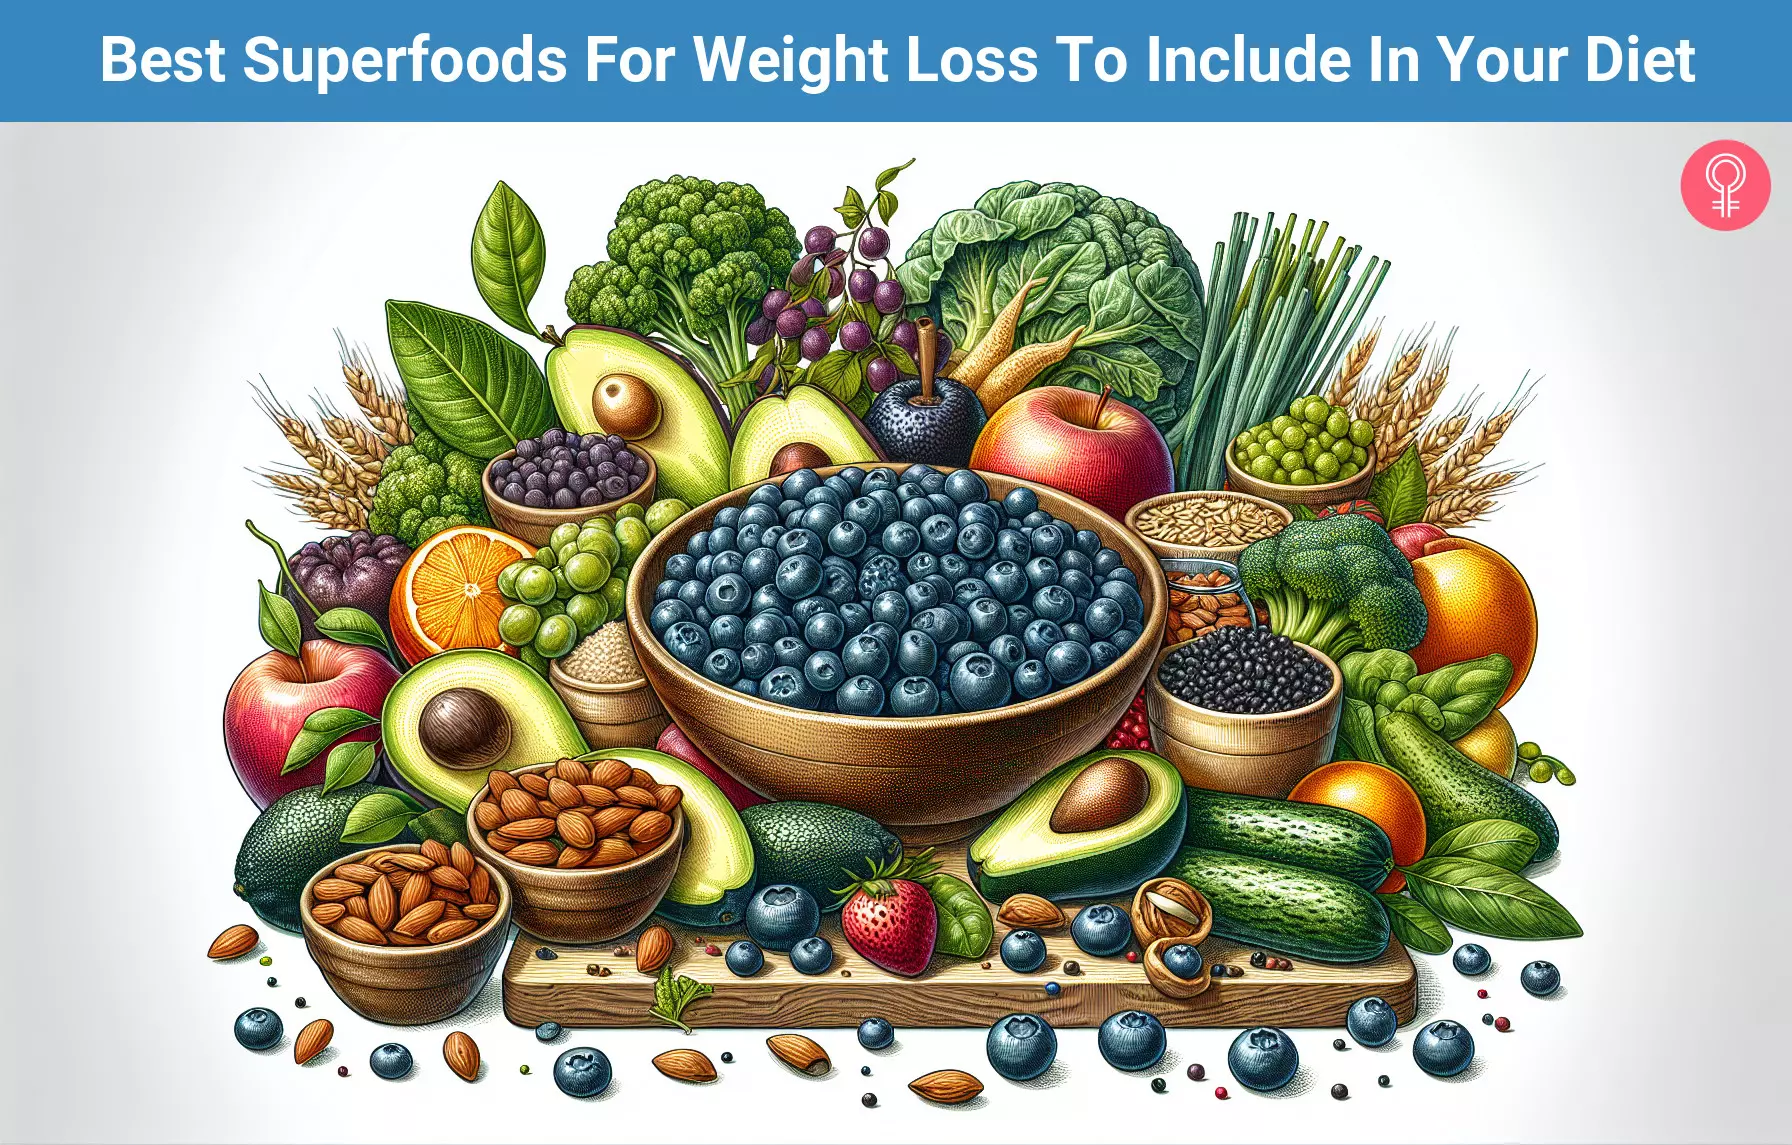 Superfoods For Weight Loss_illustration